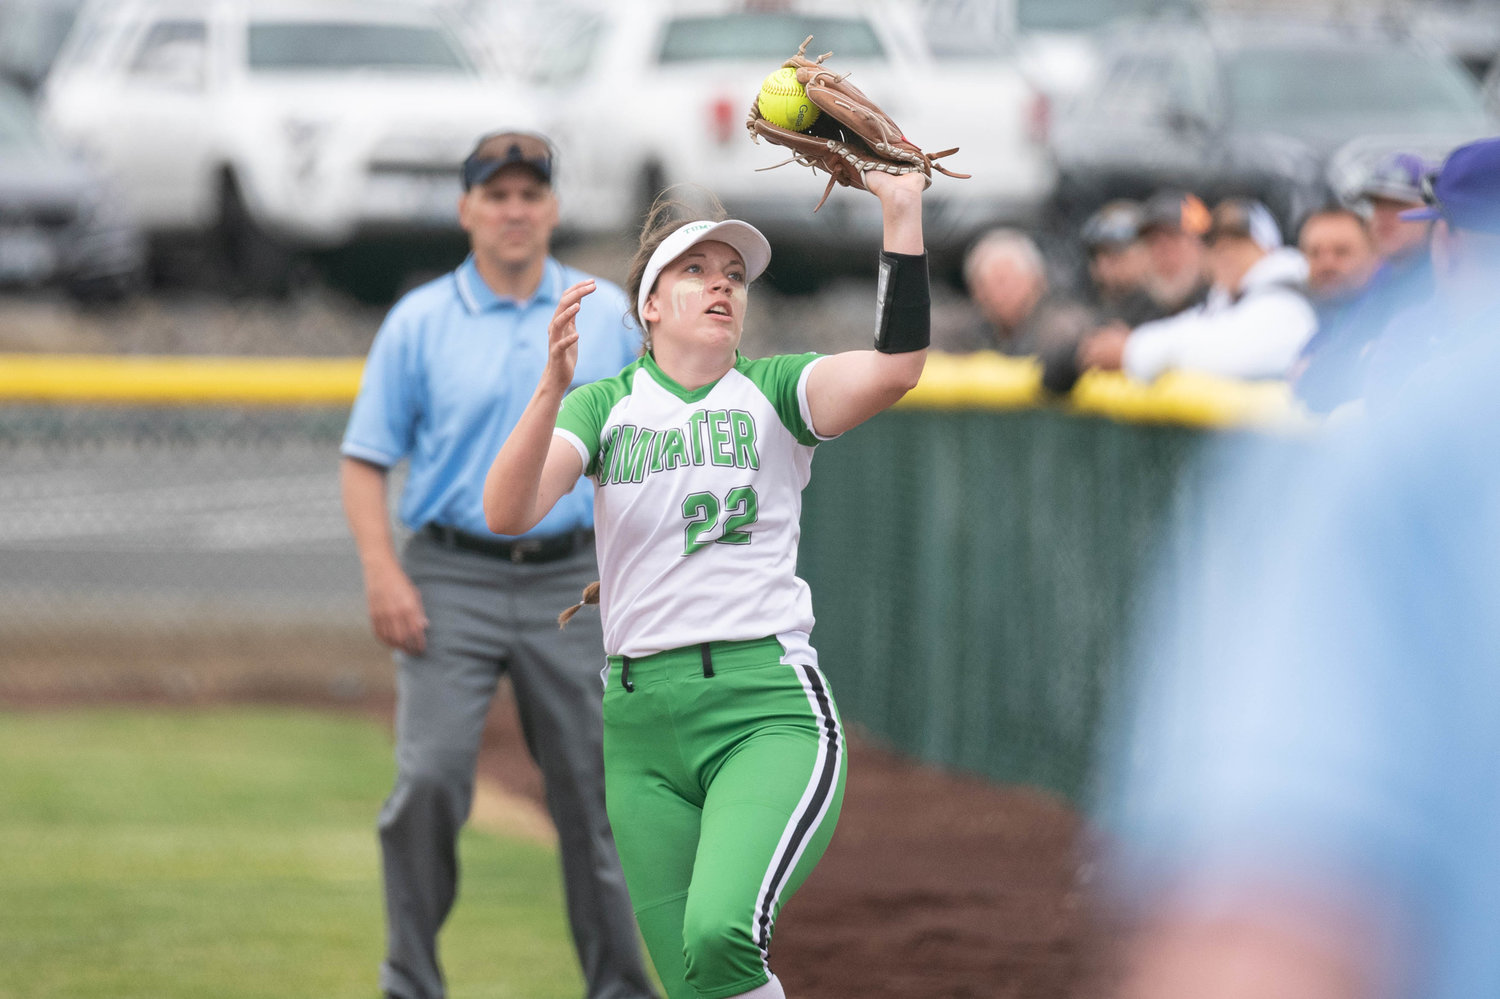 Tumwater's Megan Paull makes a catch in the infield against North Kitsap in the first round of the 2A State Softball Tournament at Carlon Park in Selah May 27.